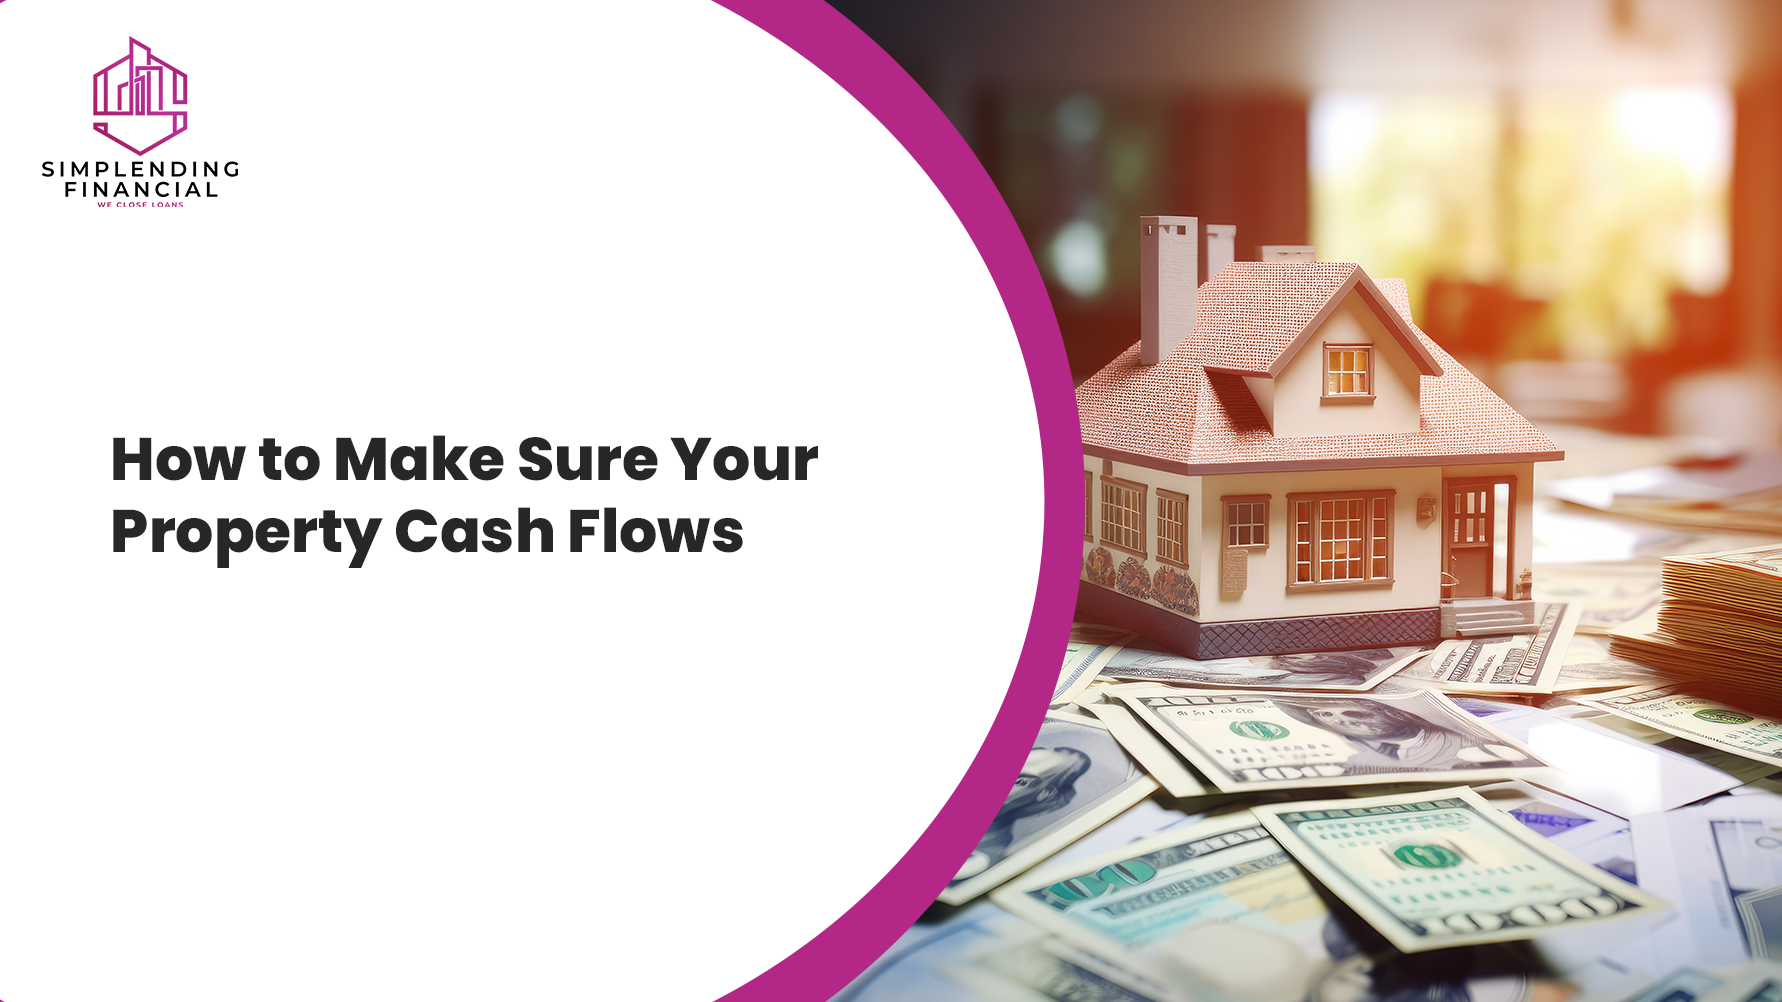 How to Make Sure Your Property Cash Flows